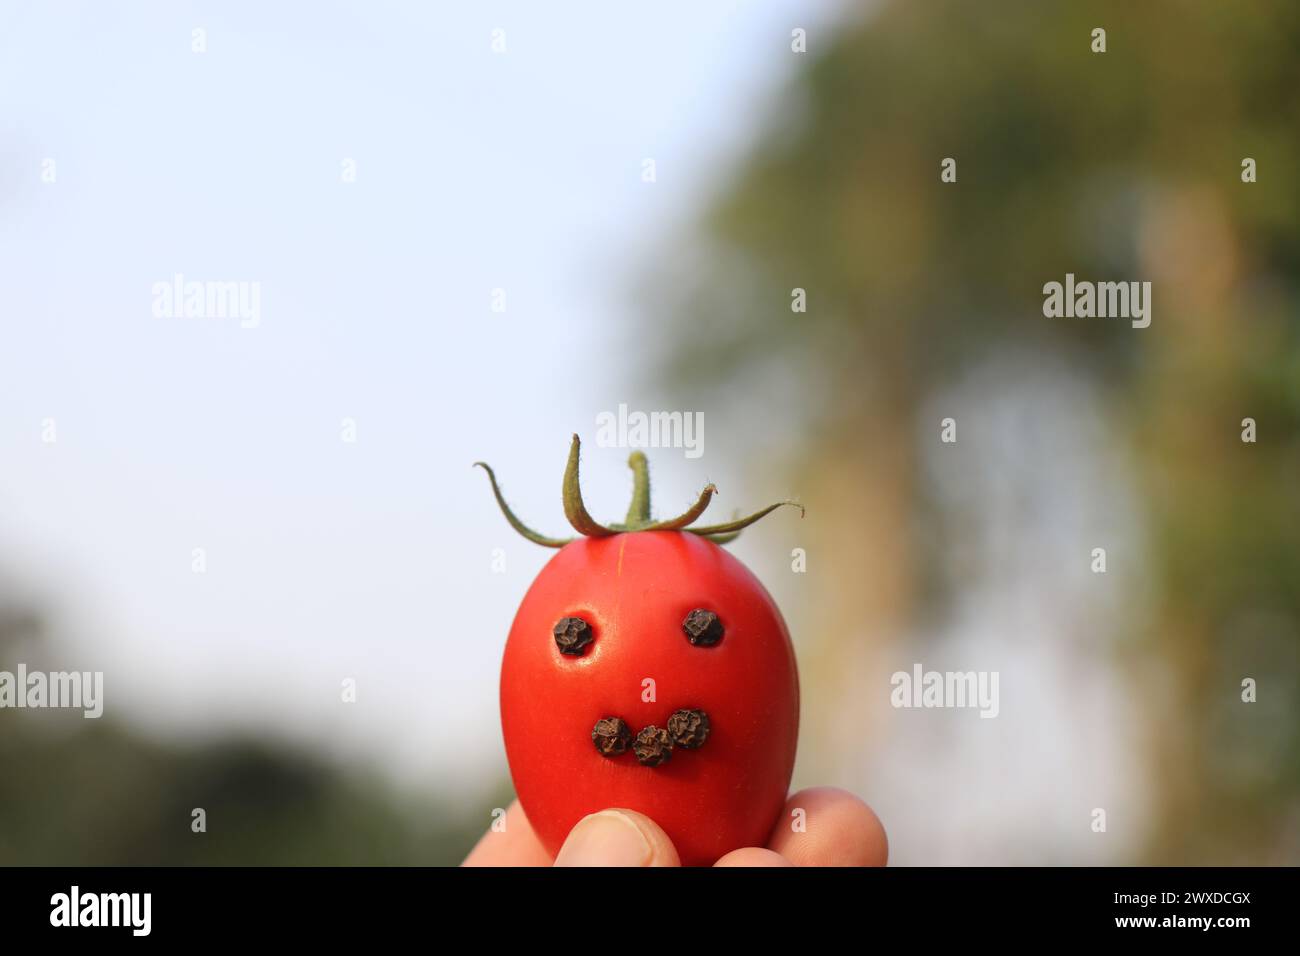 Tomato that looks happy concept made with natural available food. Concept of eat organic foods Stock Photo